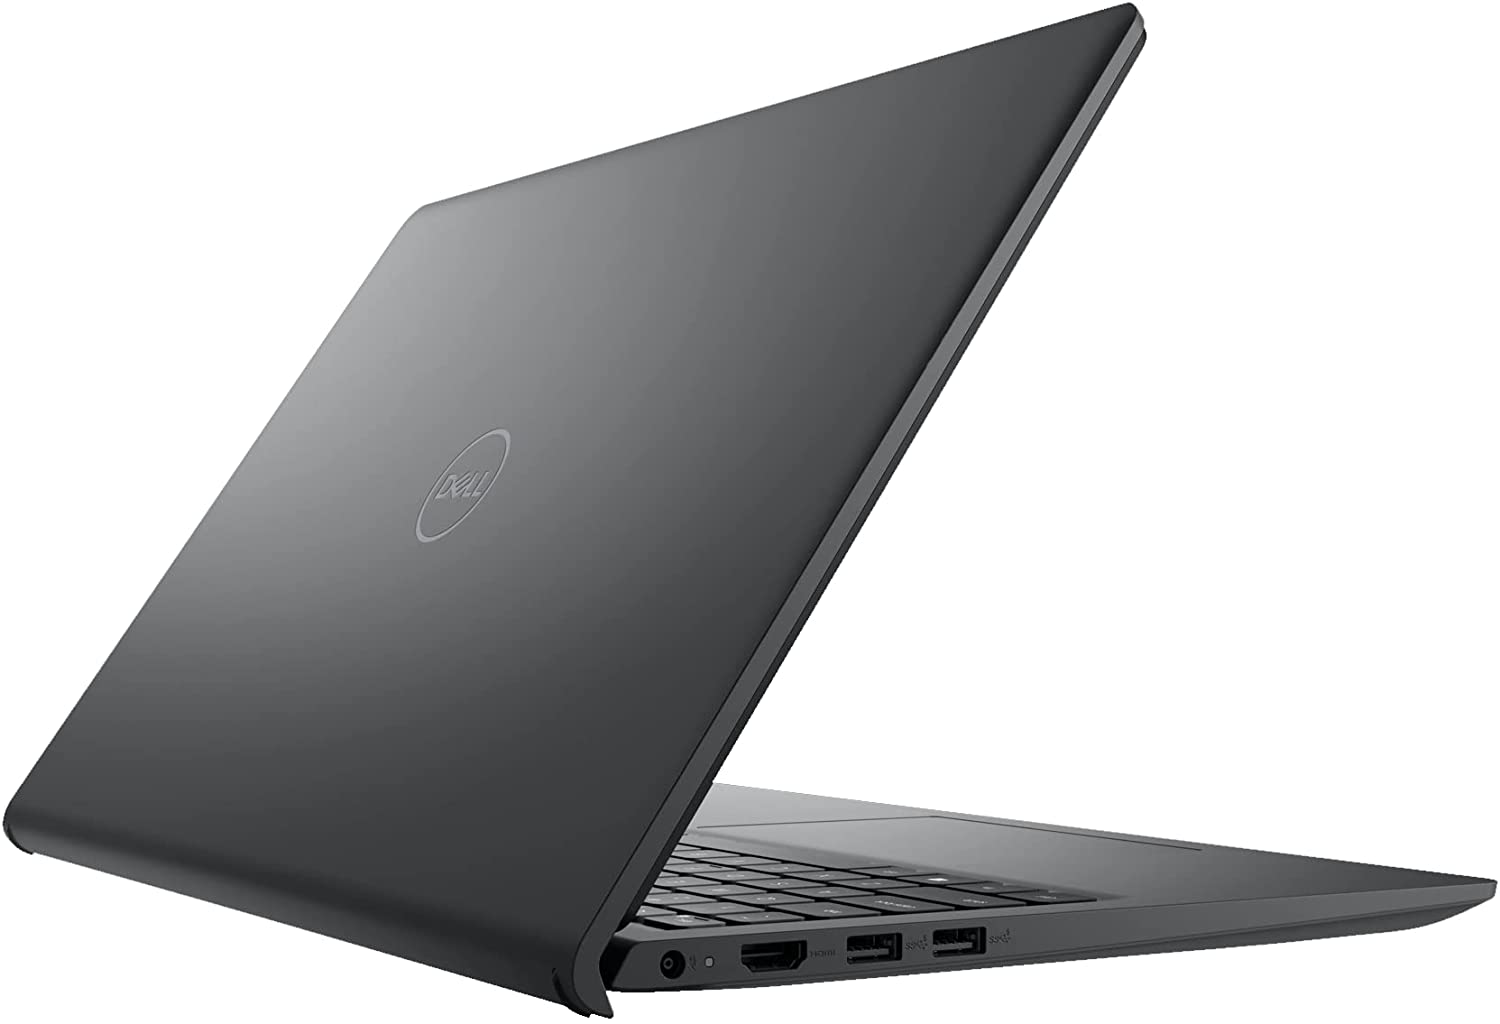 Dell Inspiron 3000 Business Laptop